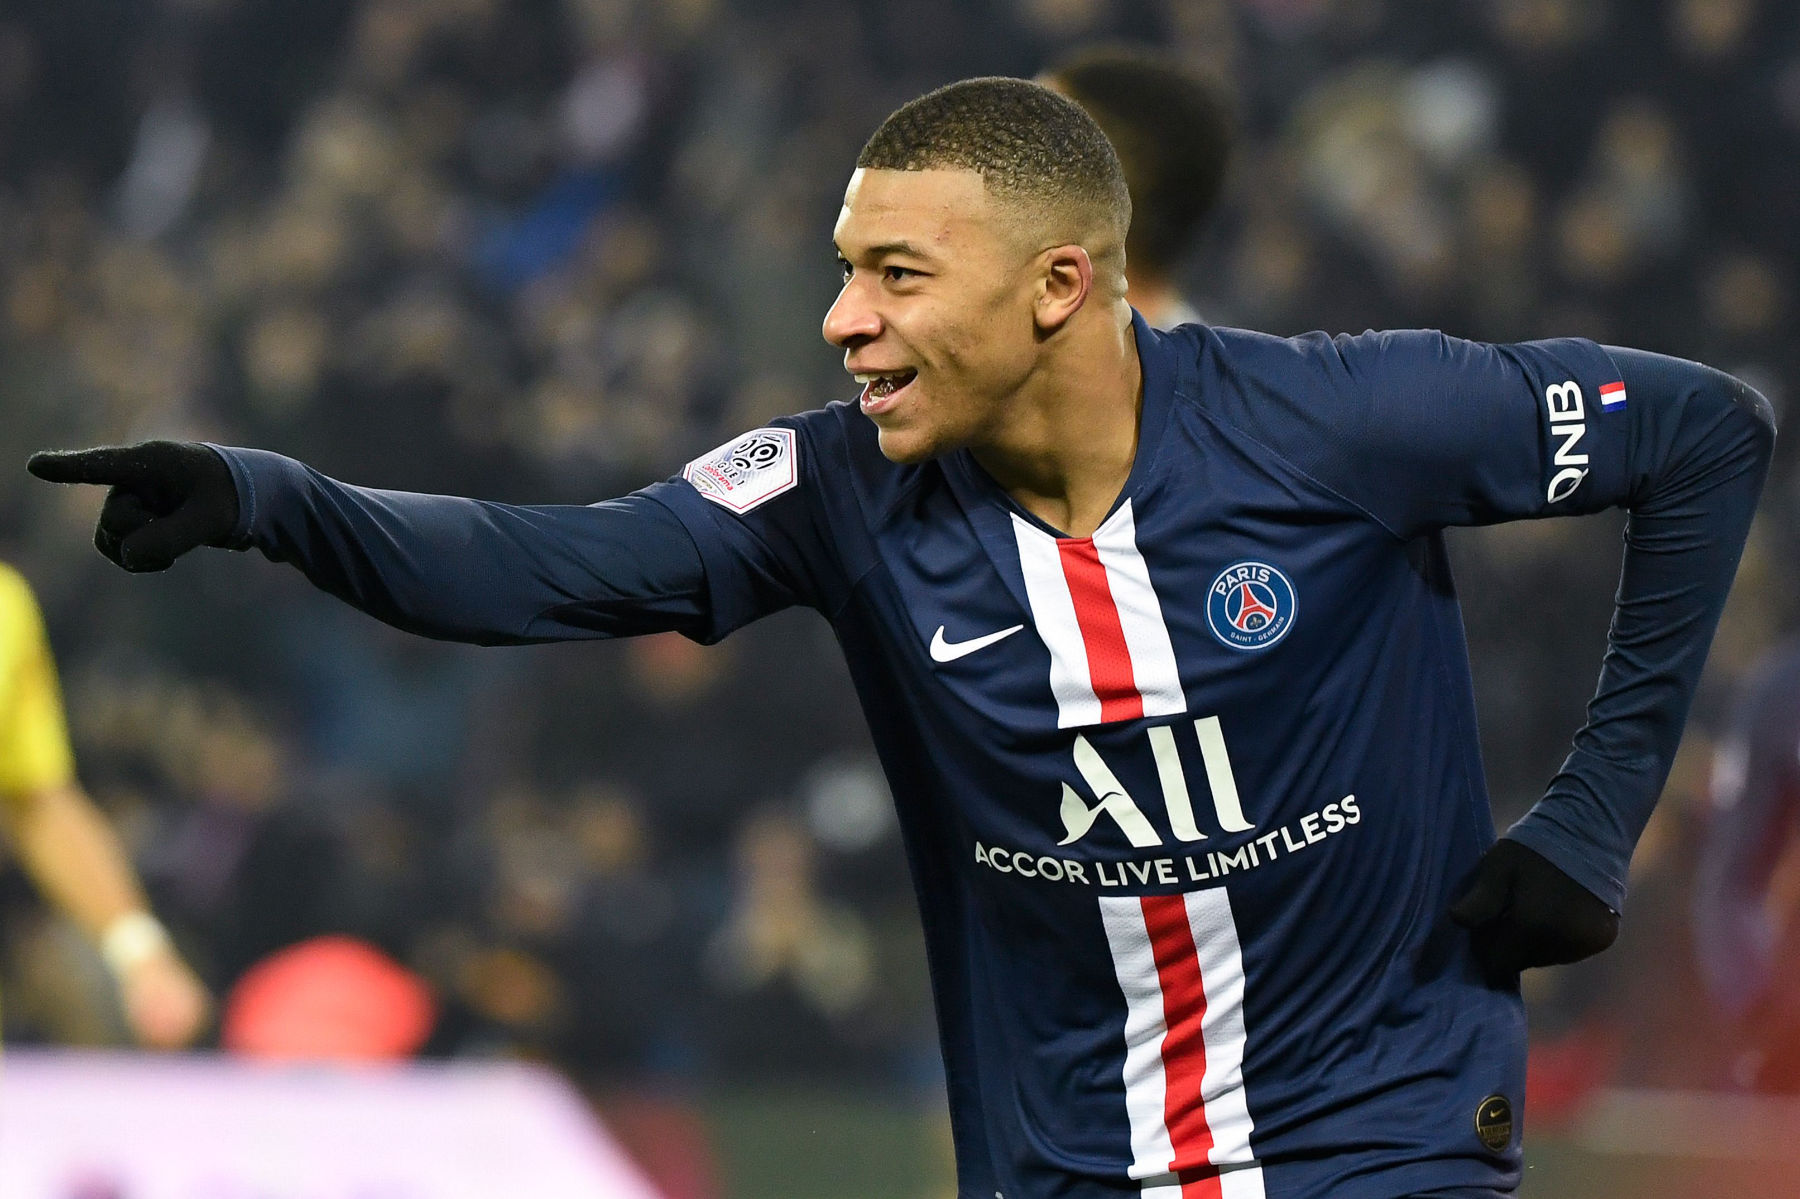 Mbappé Confirms he Will Stay On With PSG For Next Season - PSG Talk